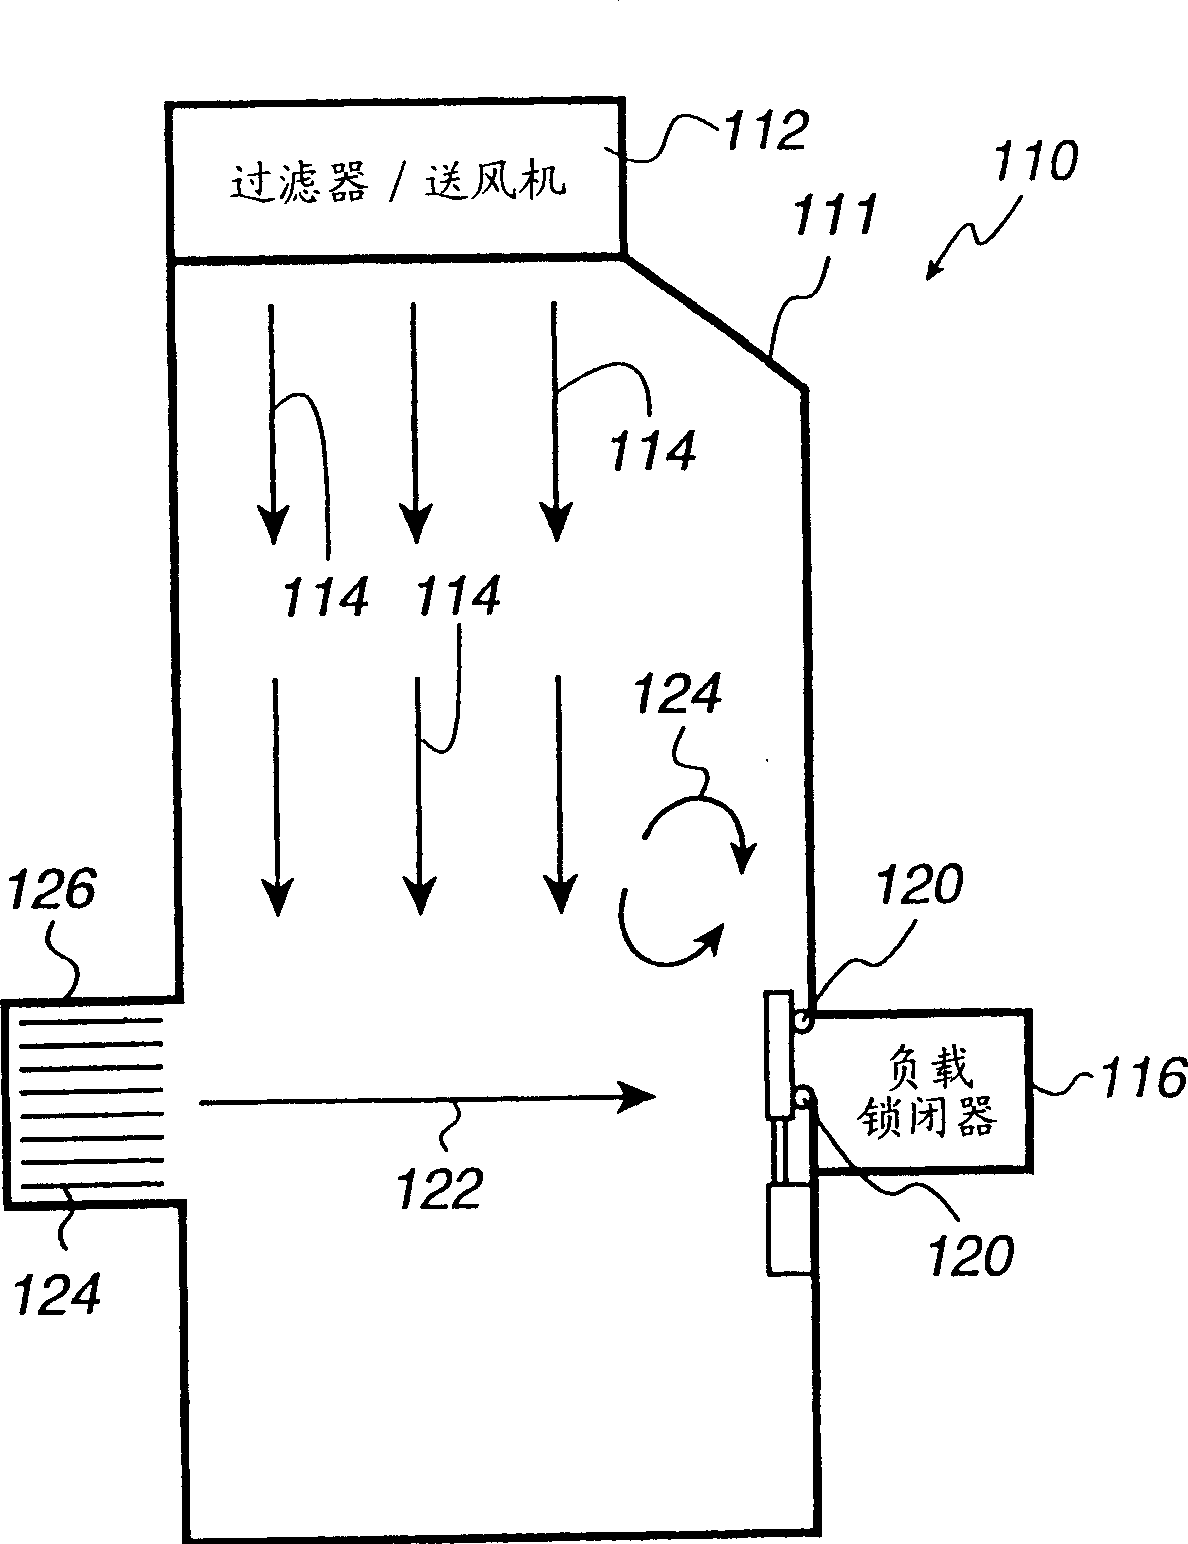 Method for creating ultra-clean mini-environment through localized air flow augentation